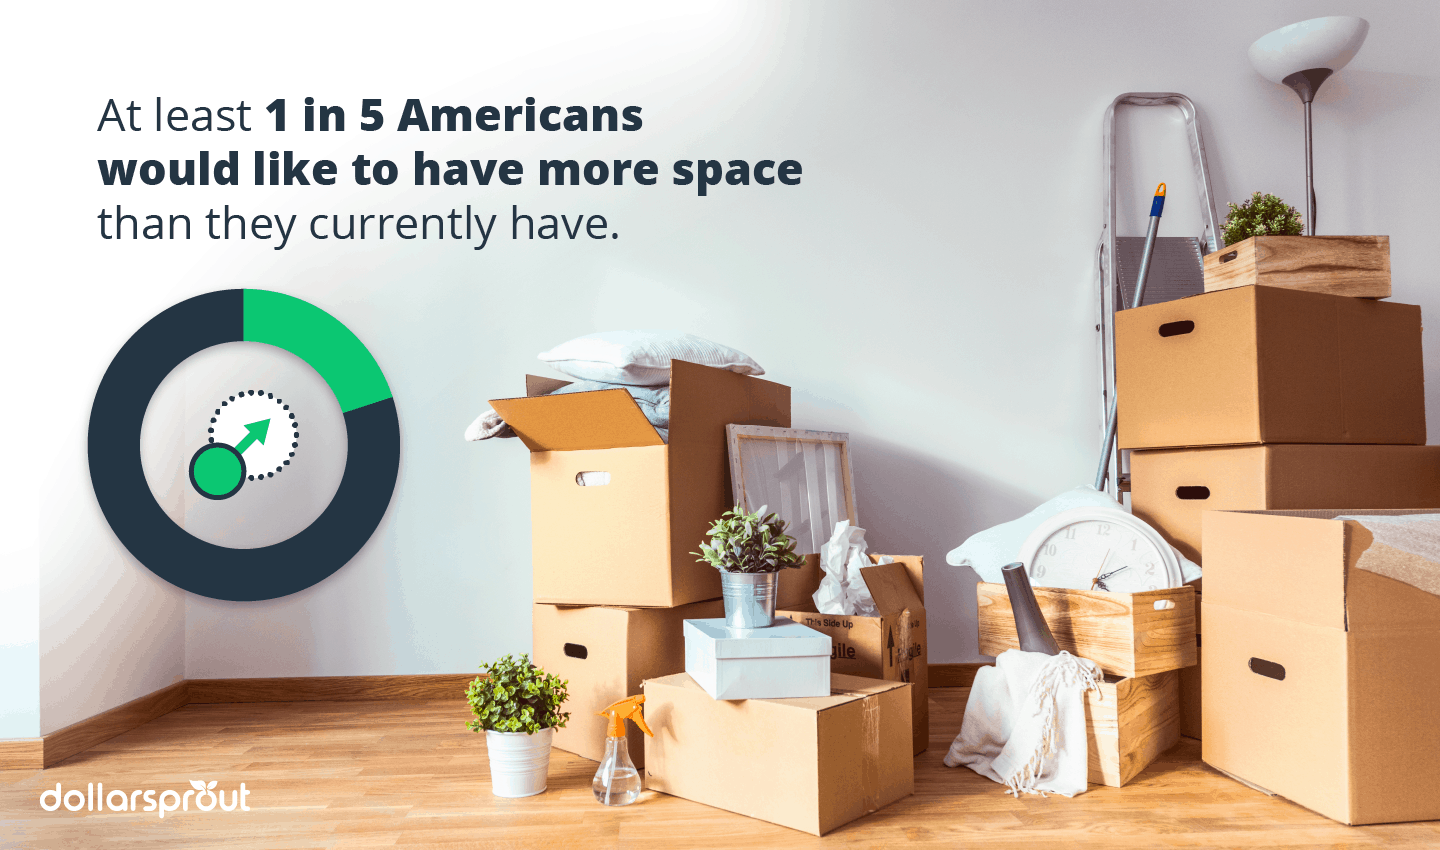 1 in 5 Americans would like to have more space